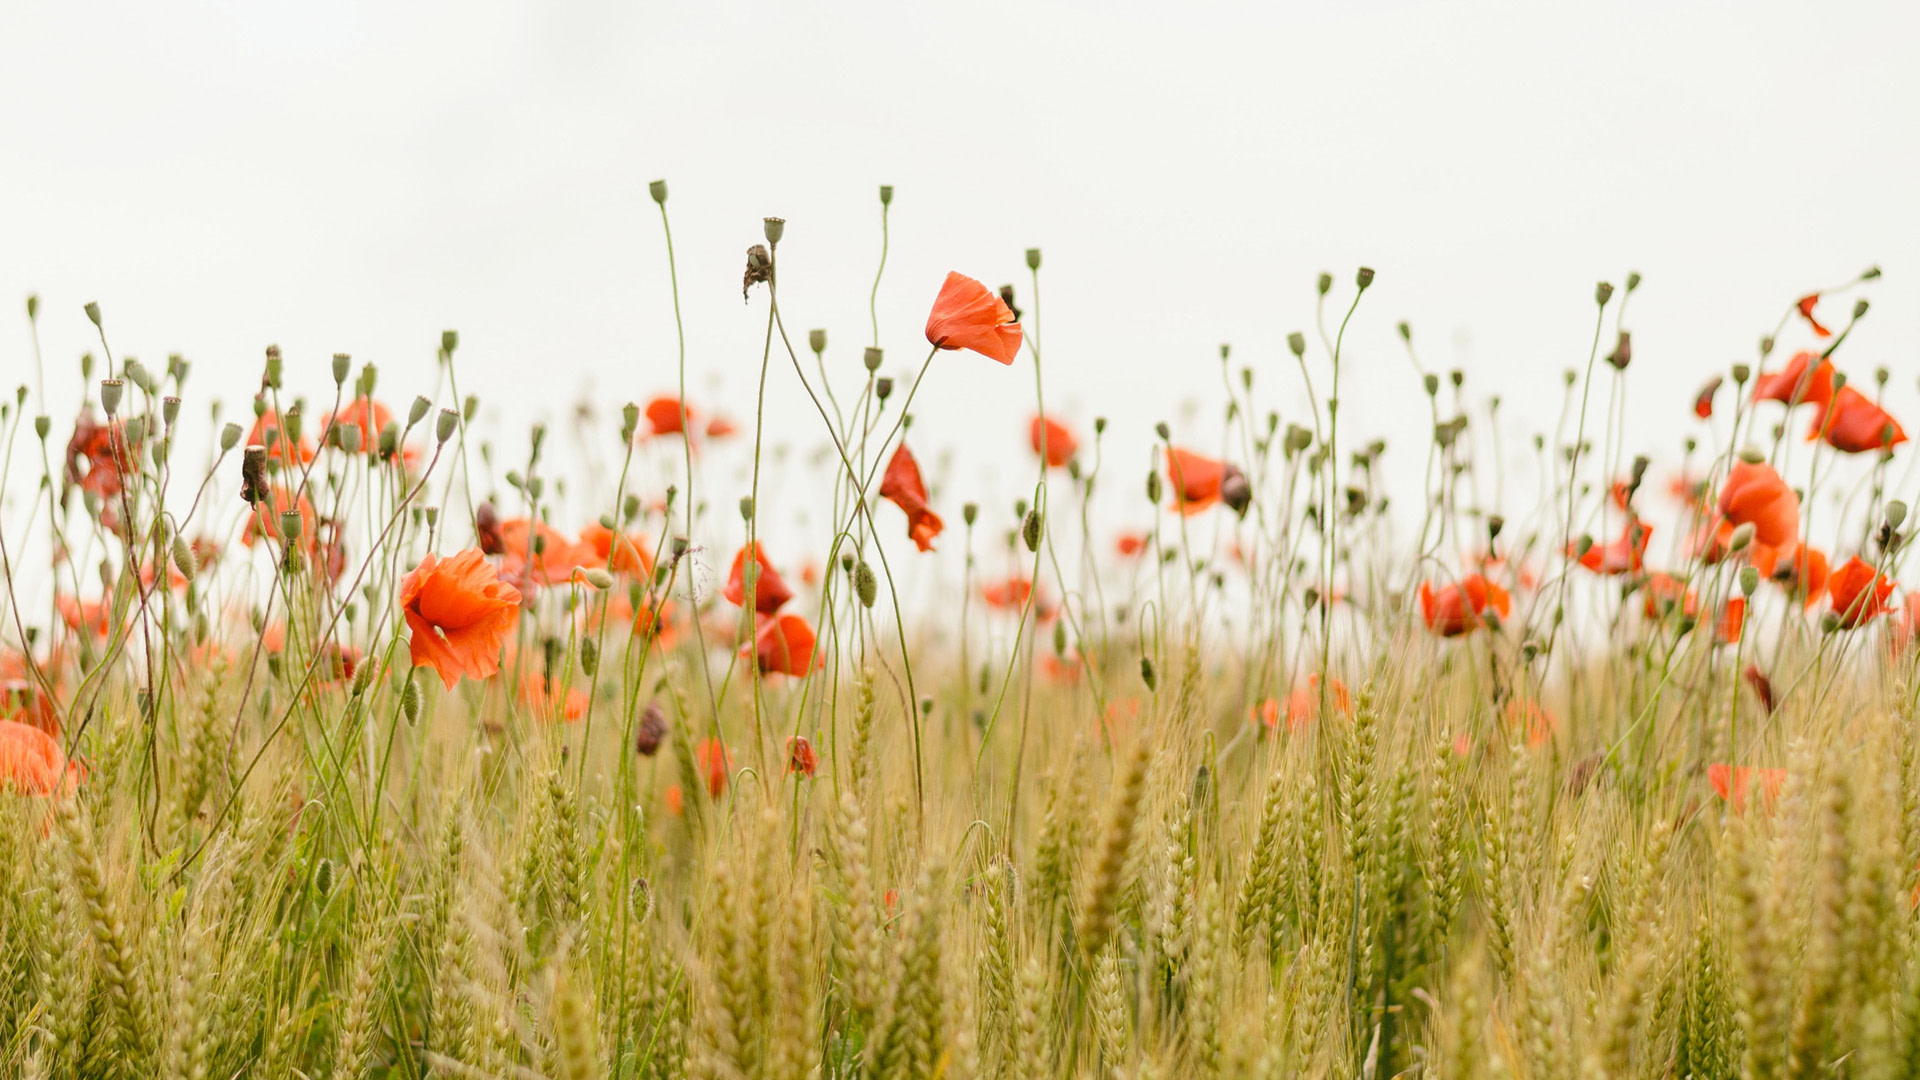 Field of grass and poppies